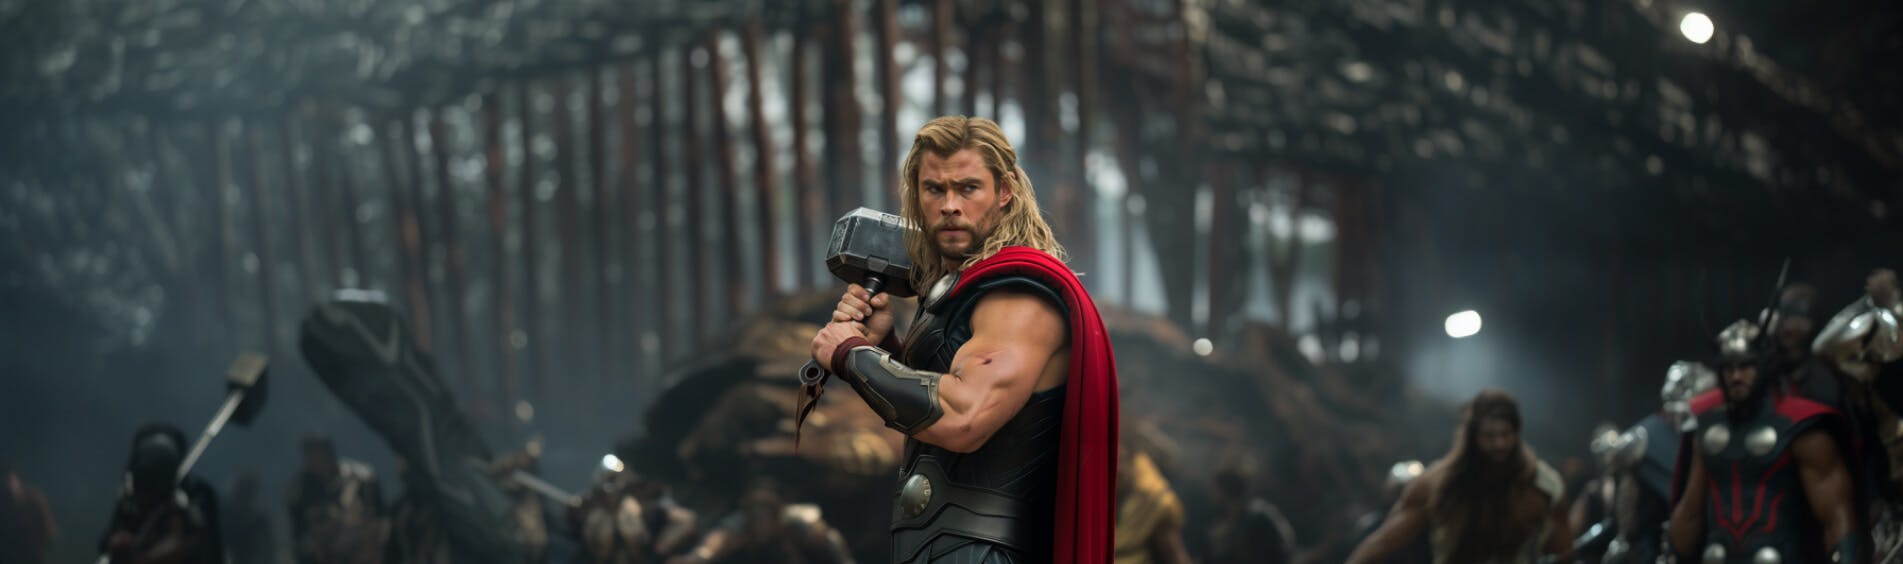 Cover Image for God Of Thunder In A New Role: The New Poster For Hemsworth’s New Movie Is Out